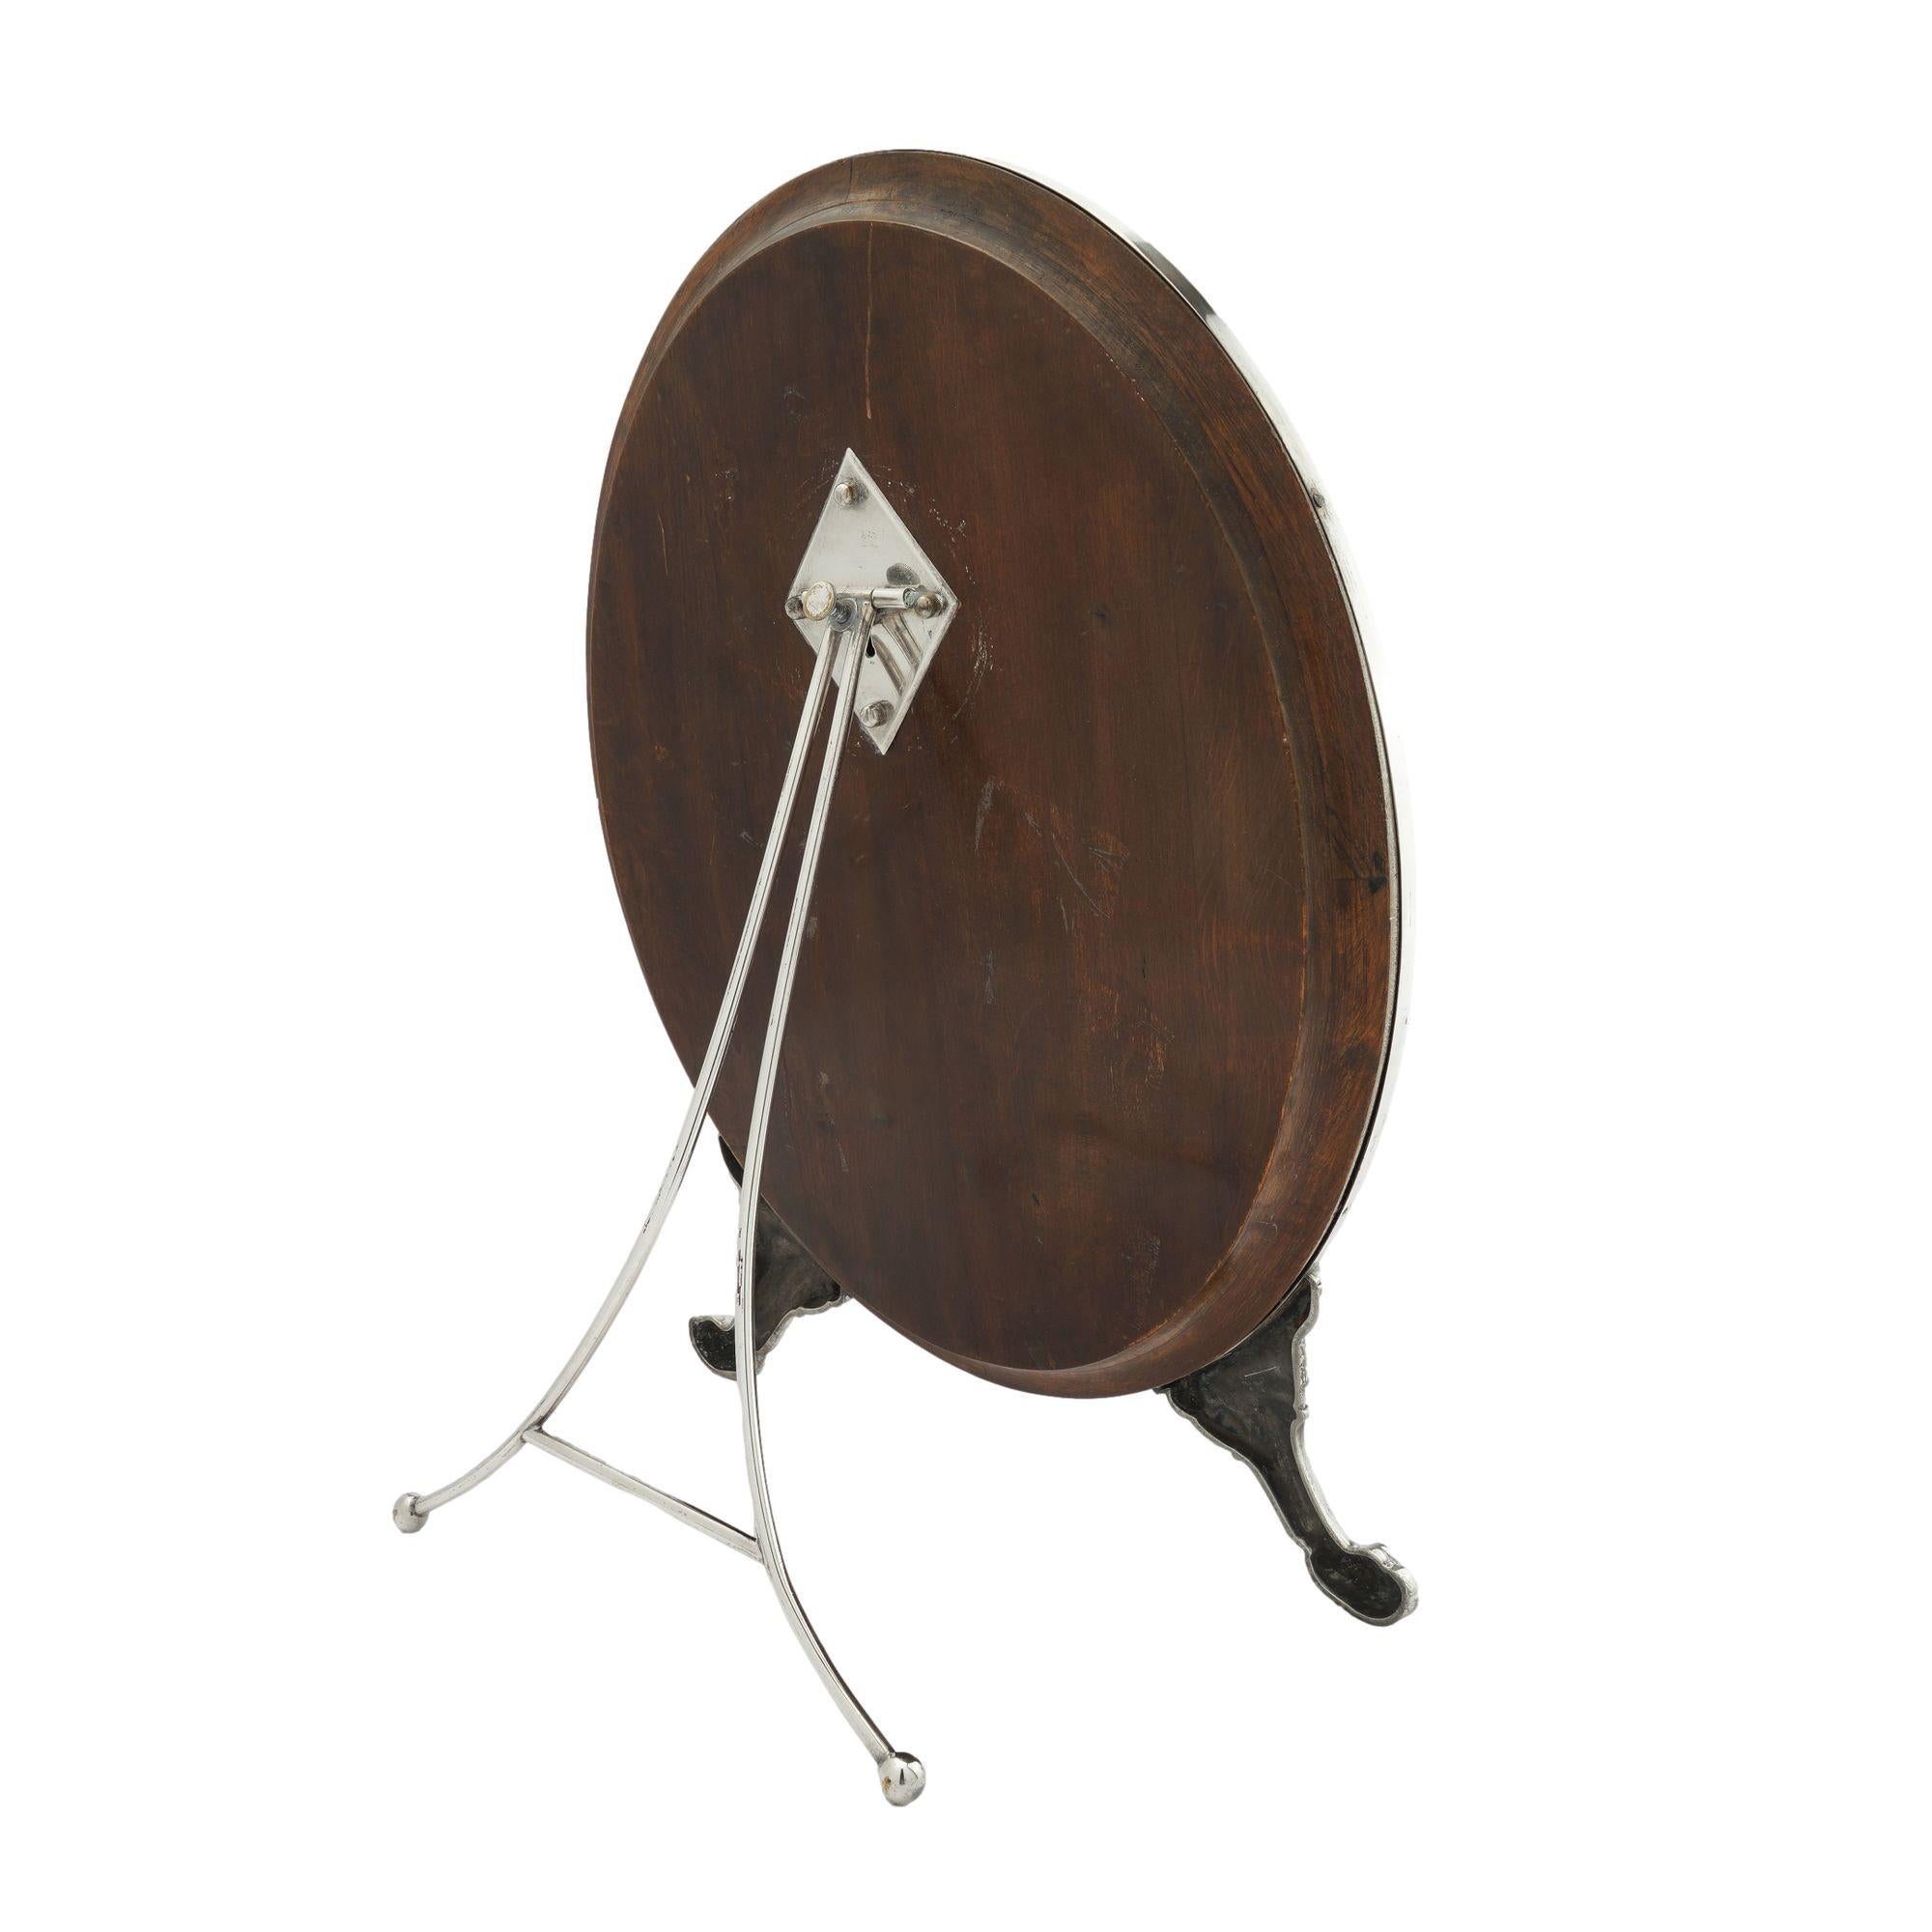 Oval easel back dressing mirror attributed to the Norblin Metal Works, 1880-1900 2